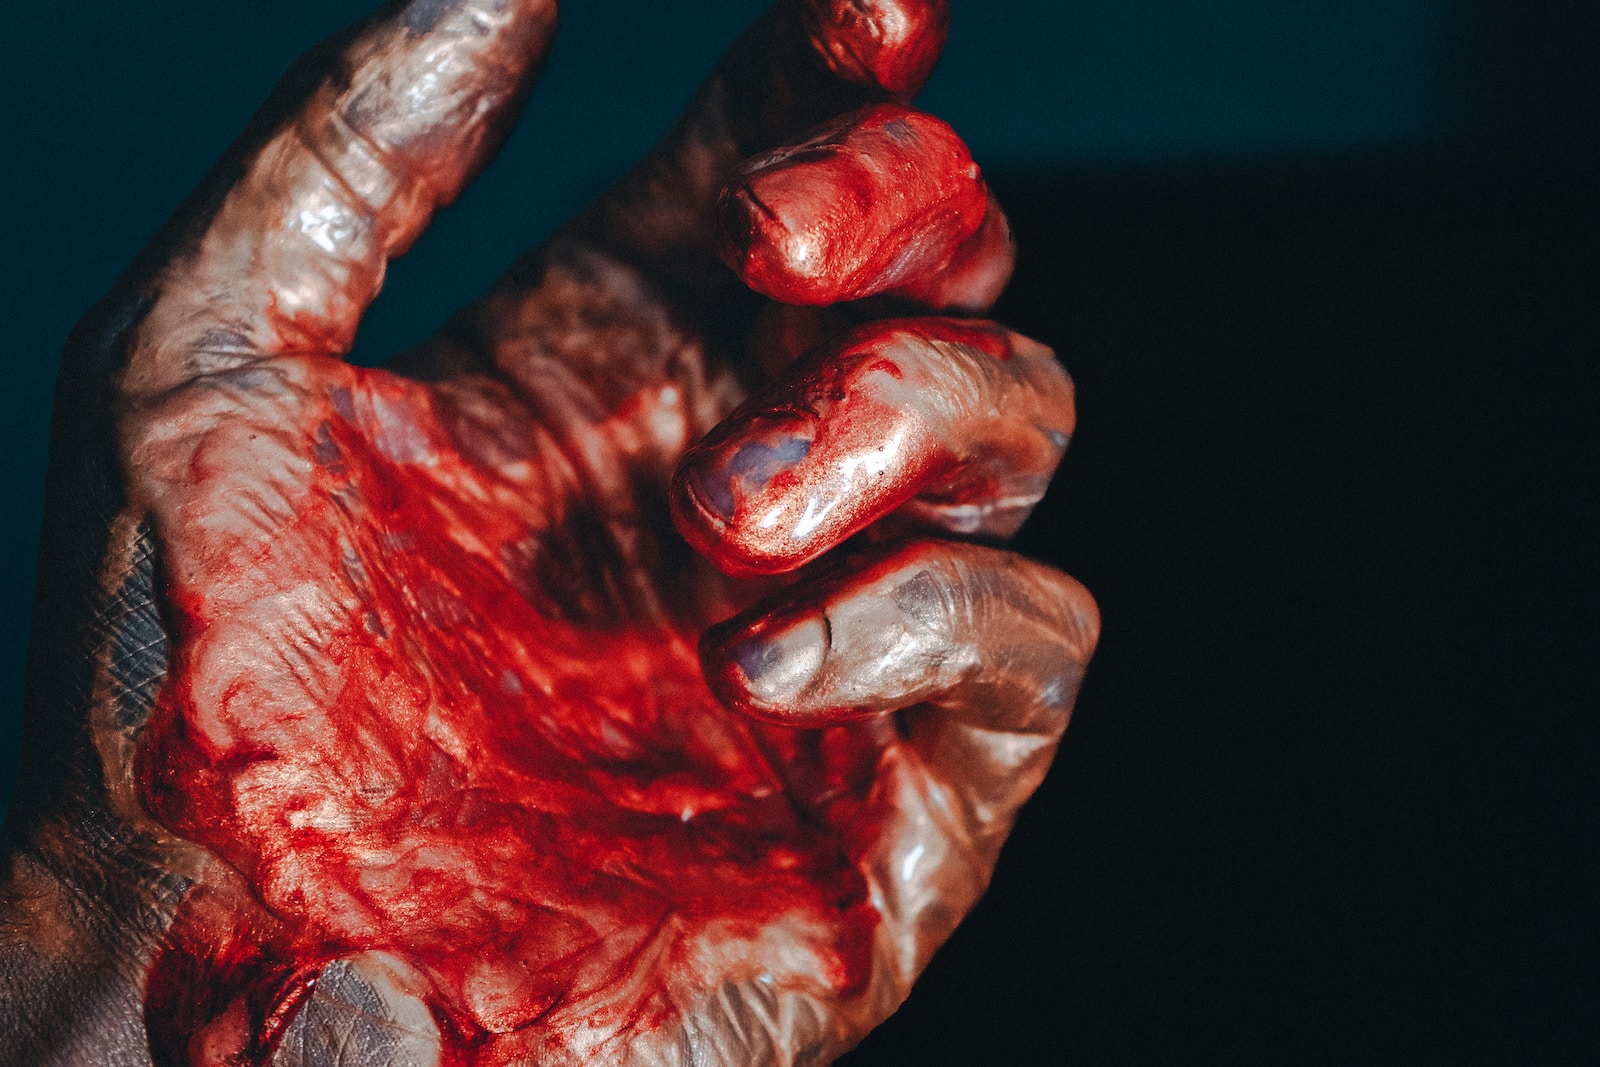 a person's hand with blood on it